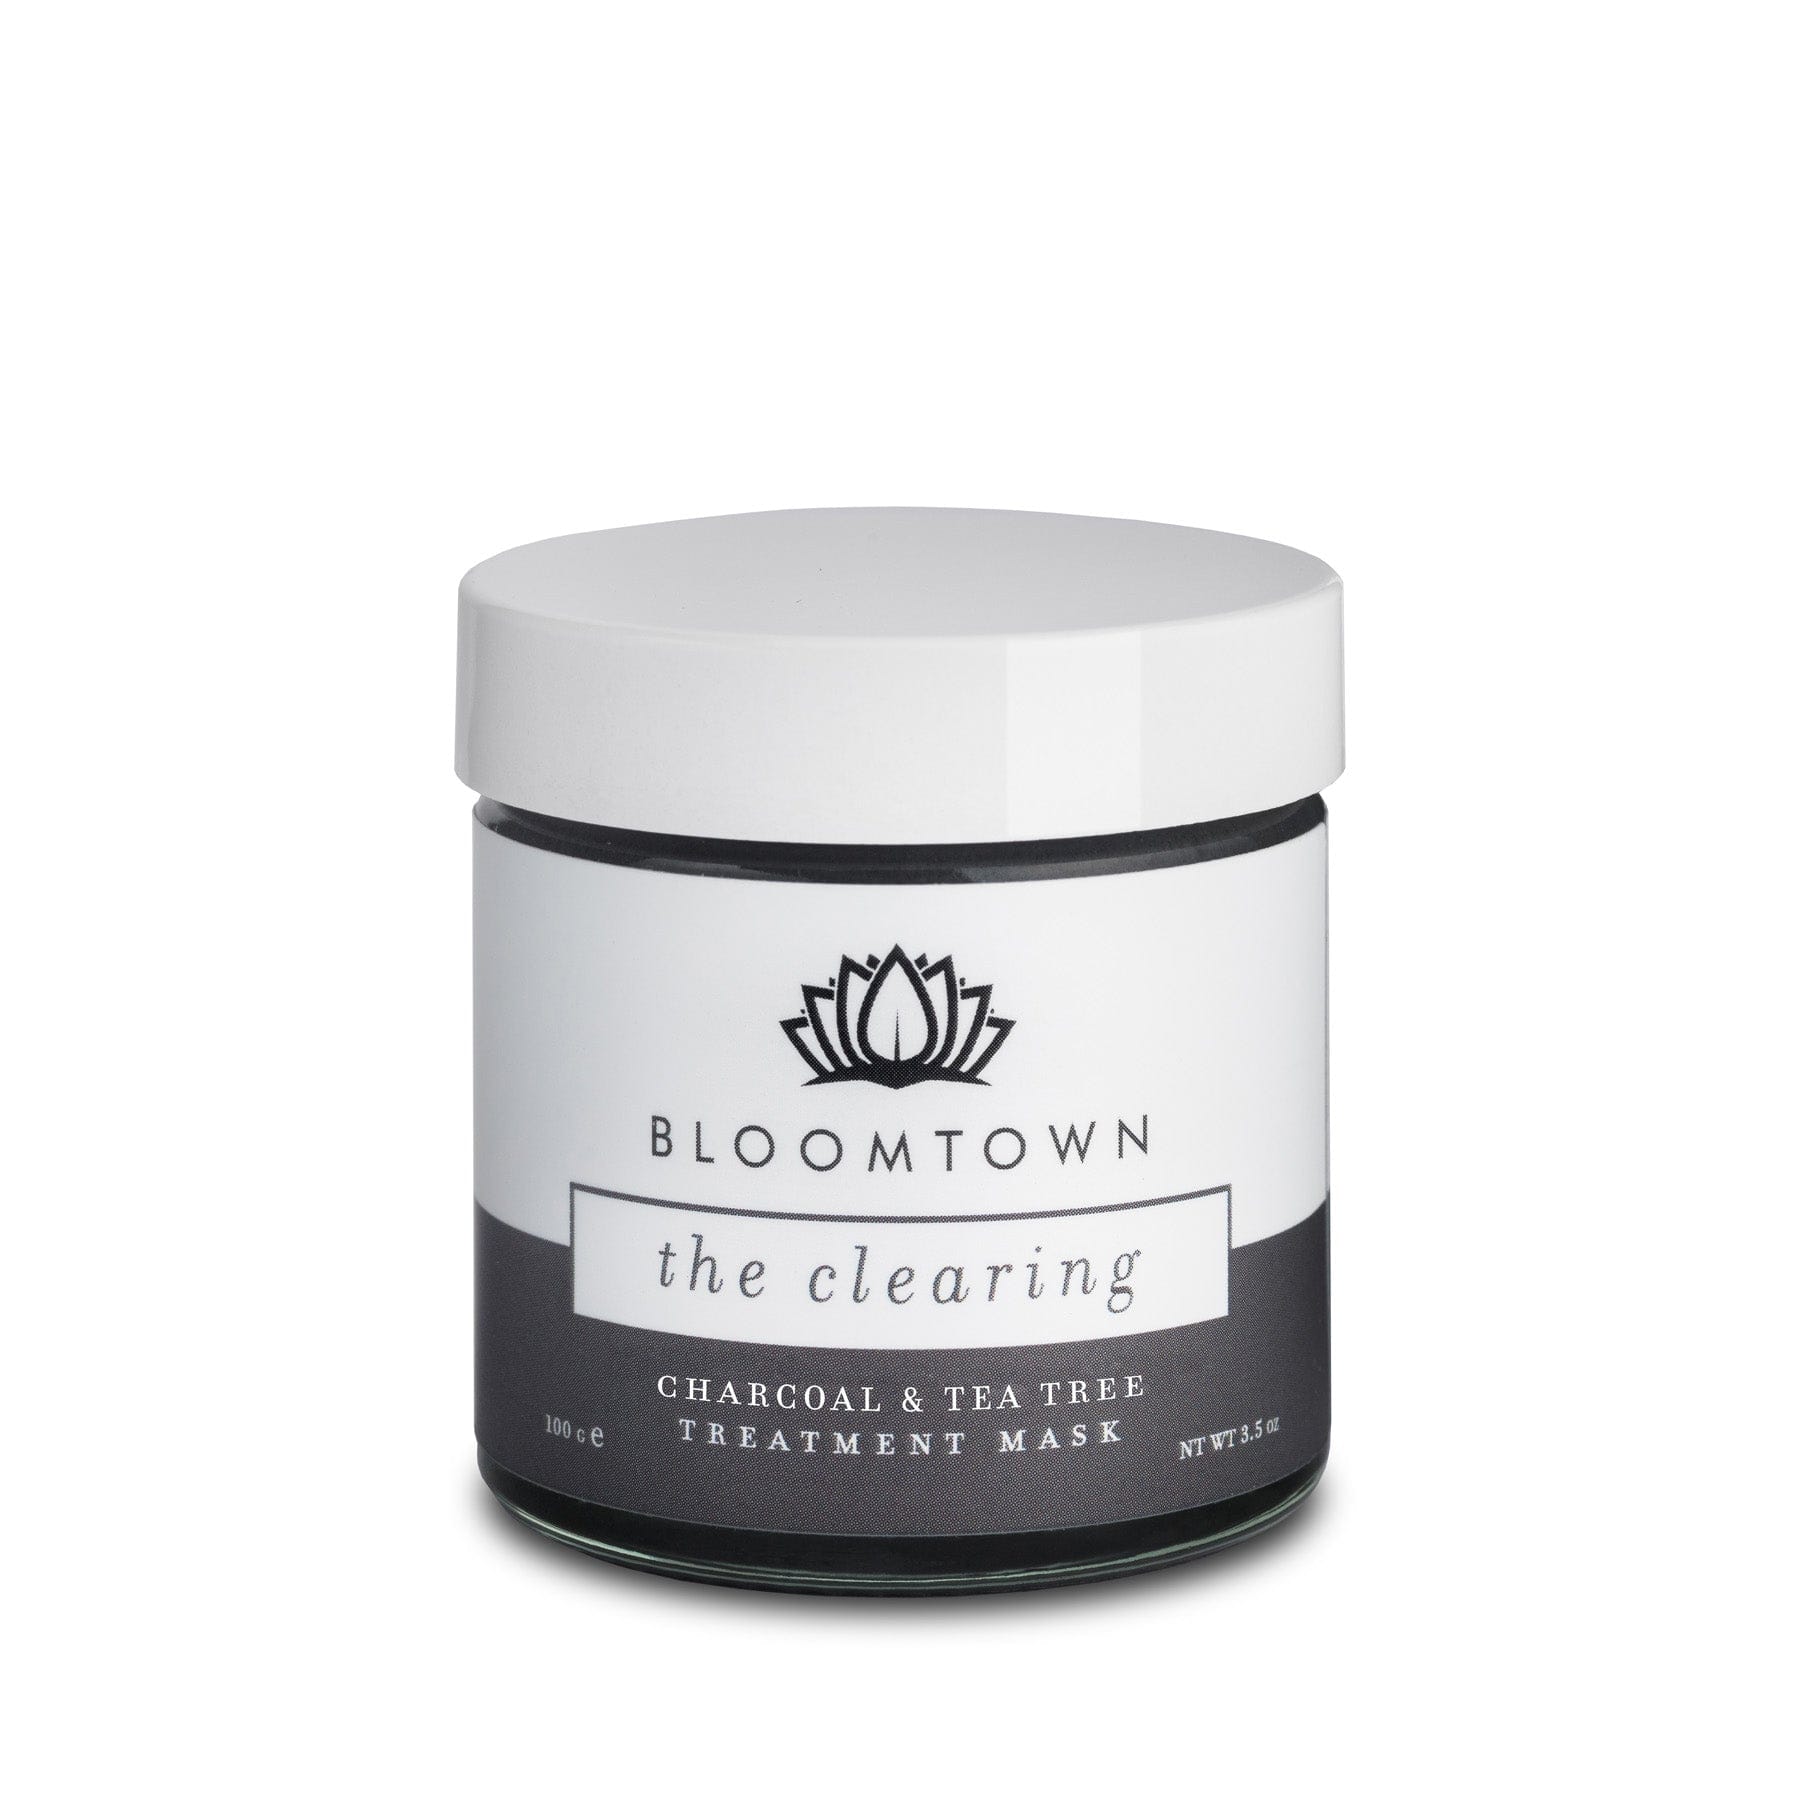 Bloomtown The Clearing Charcoal and Tea Tree Treatment Mask skincare product jar isolated on white background